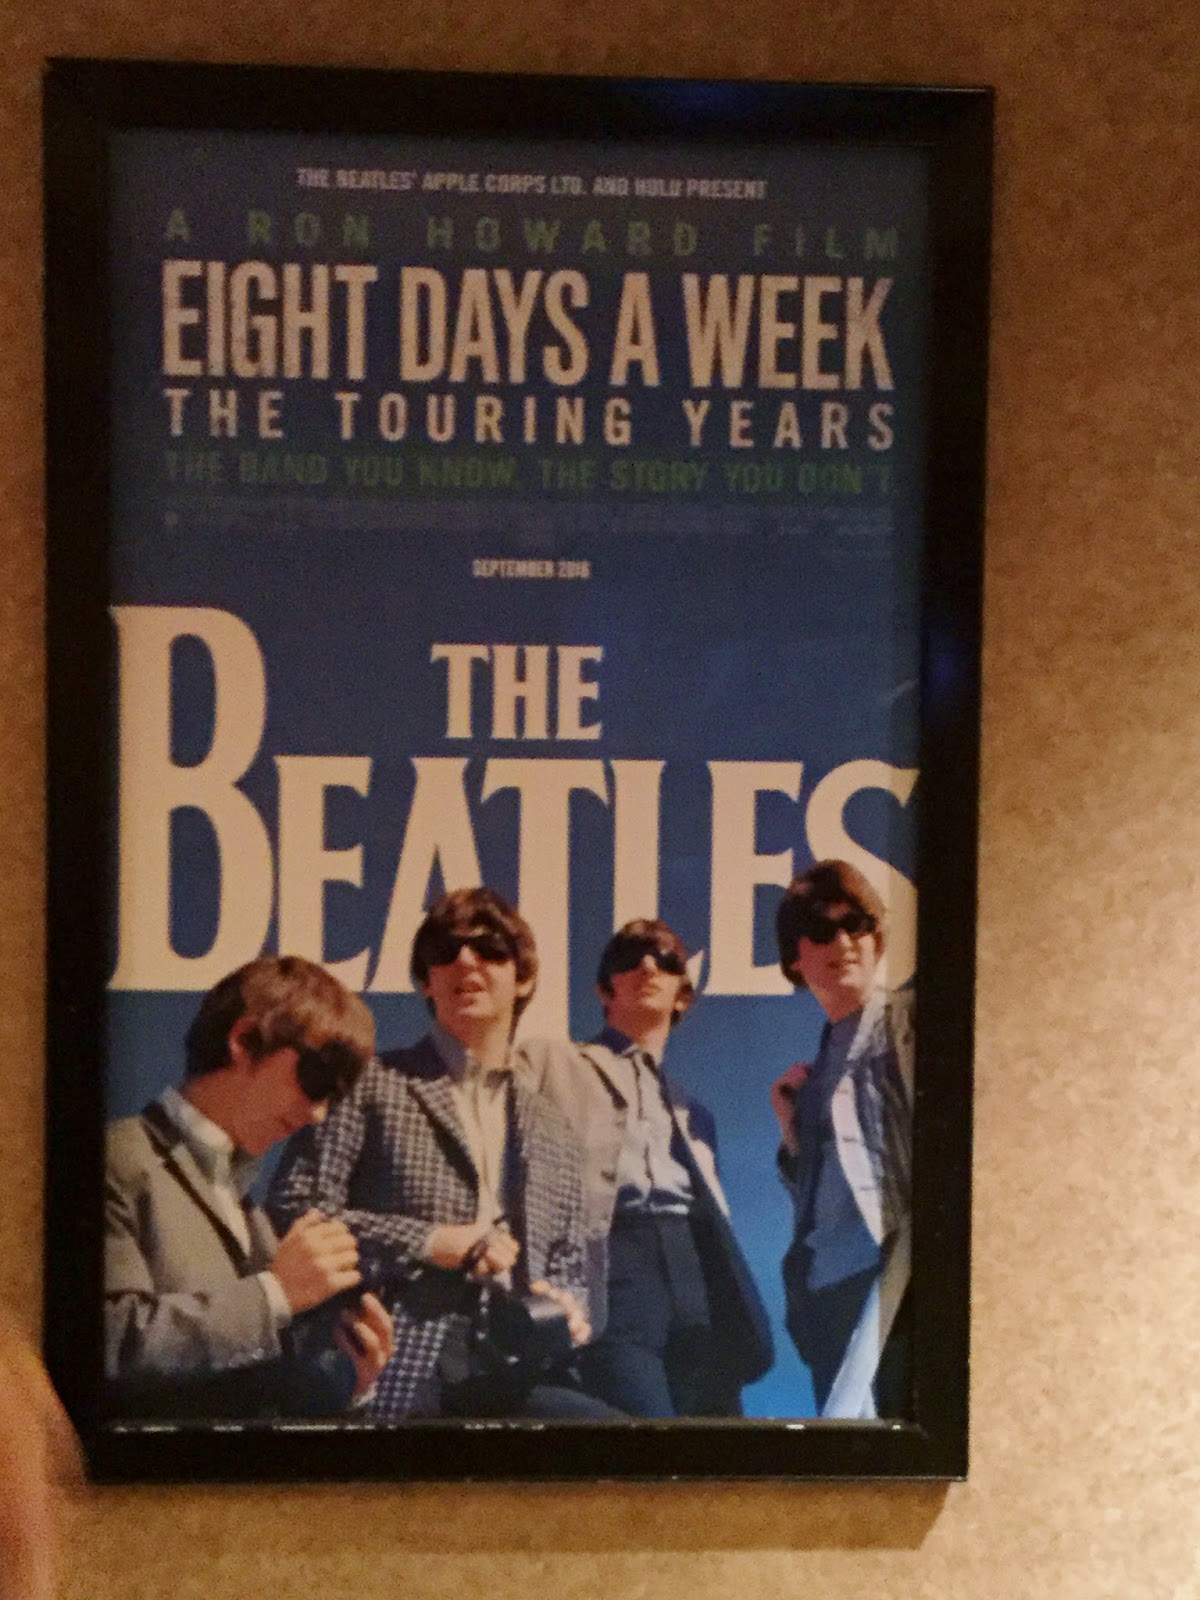 Meet The Beatles For Real Eight Days A Week The Beatles Touring Years A Review